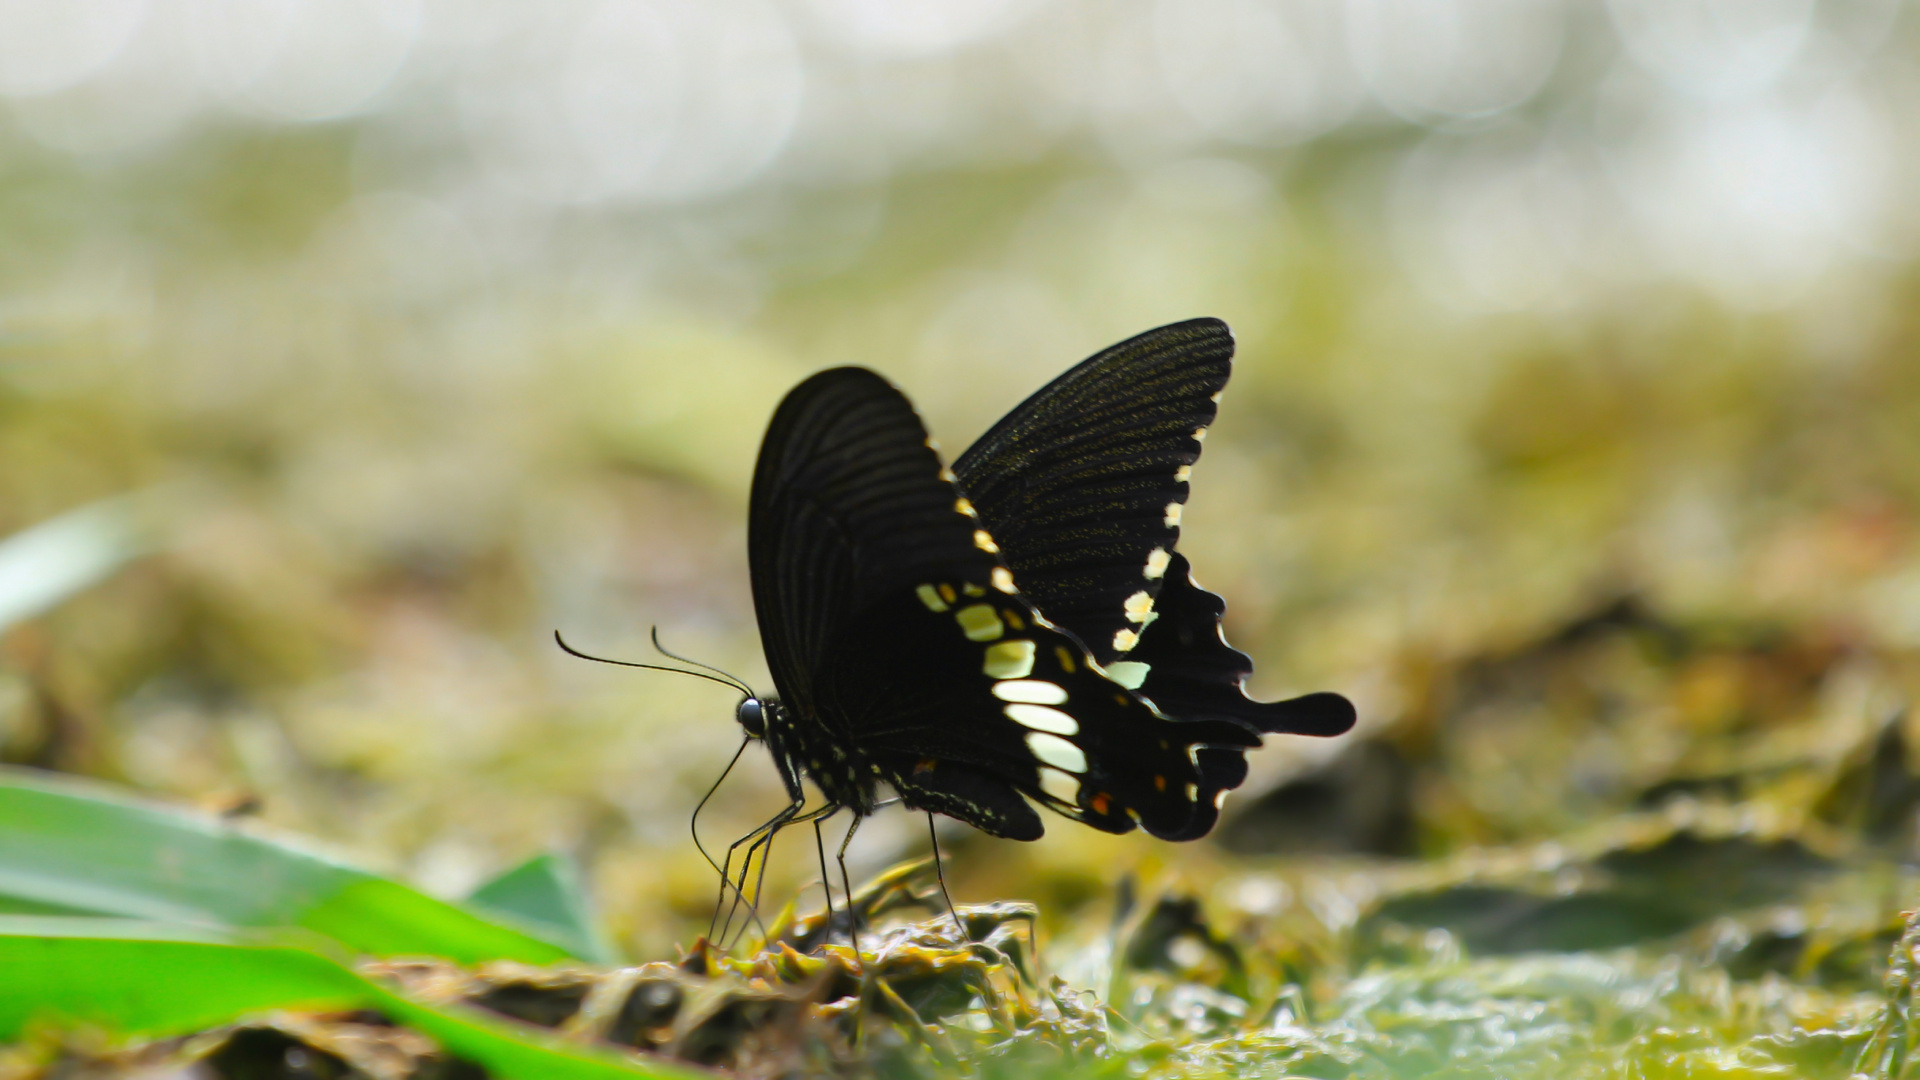 Black and White Butterfly on Green Grass During Daytime. Wallpaper in 1920x1080 Resolution